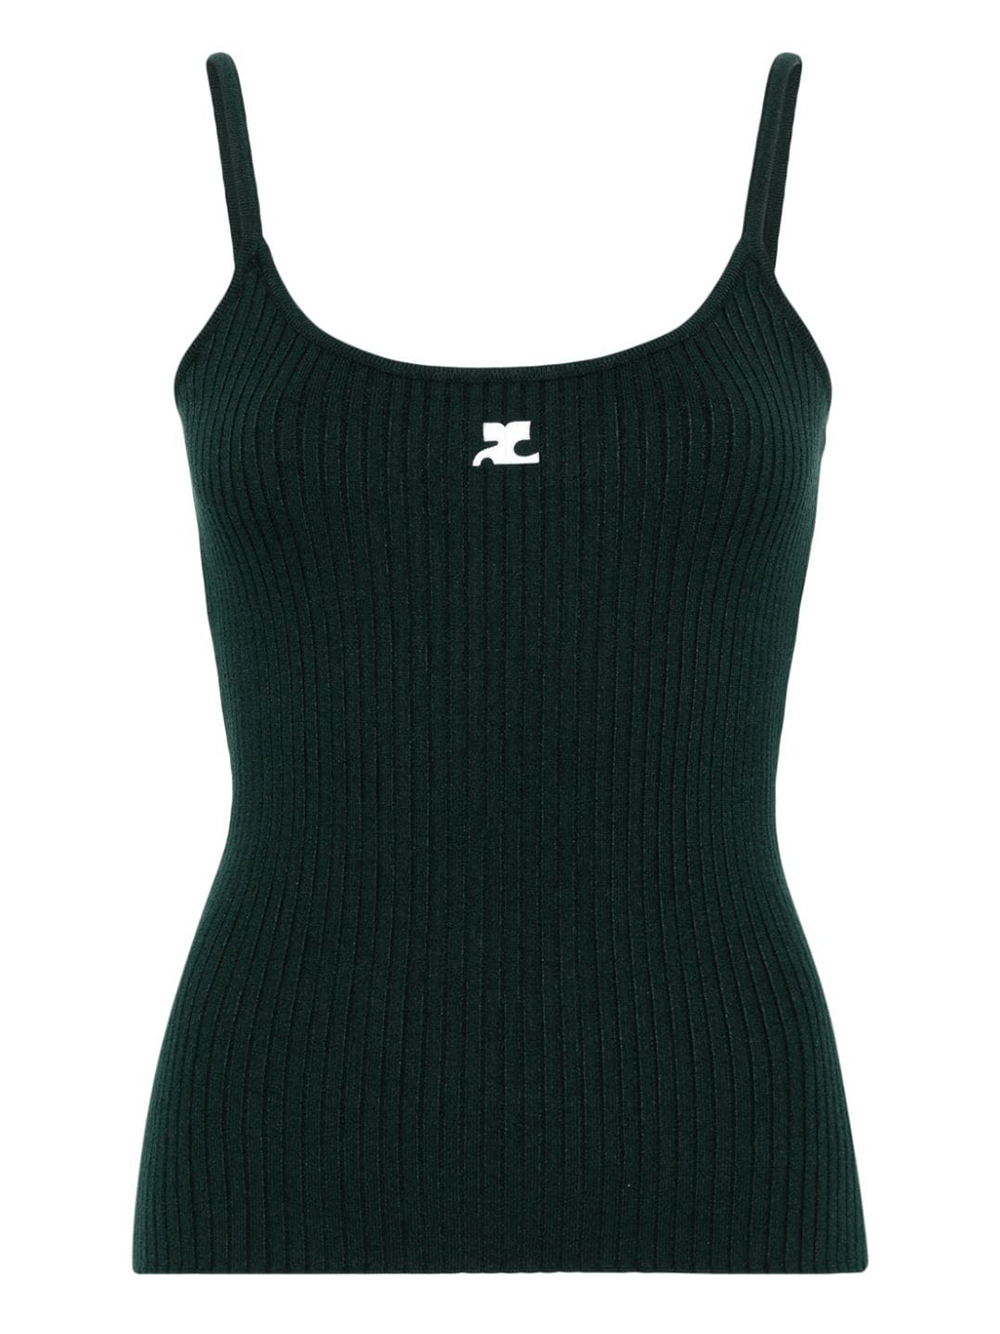 courreges-Reedition-Knit-Tank-Top-Dark-Green-1